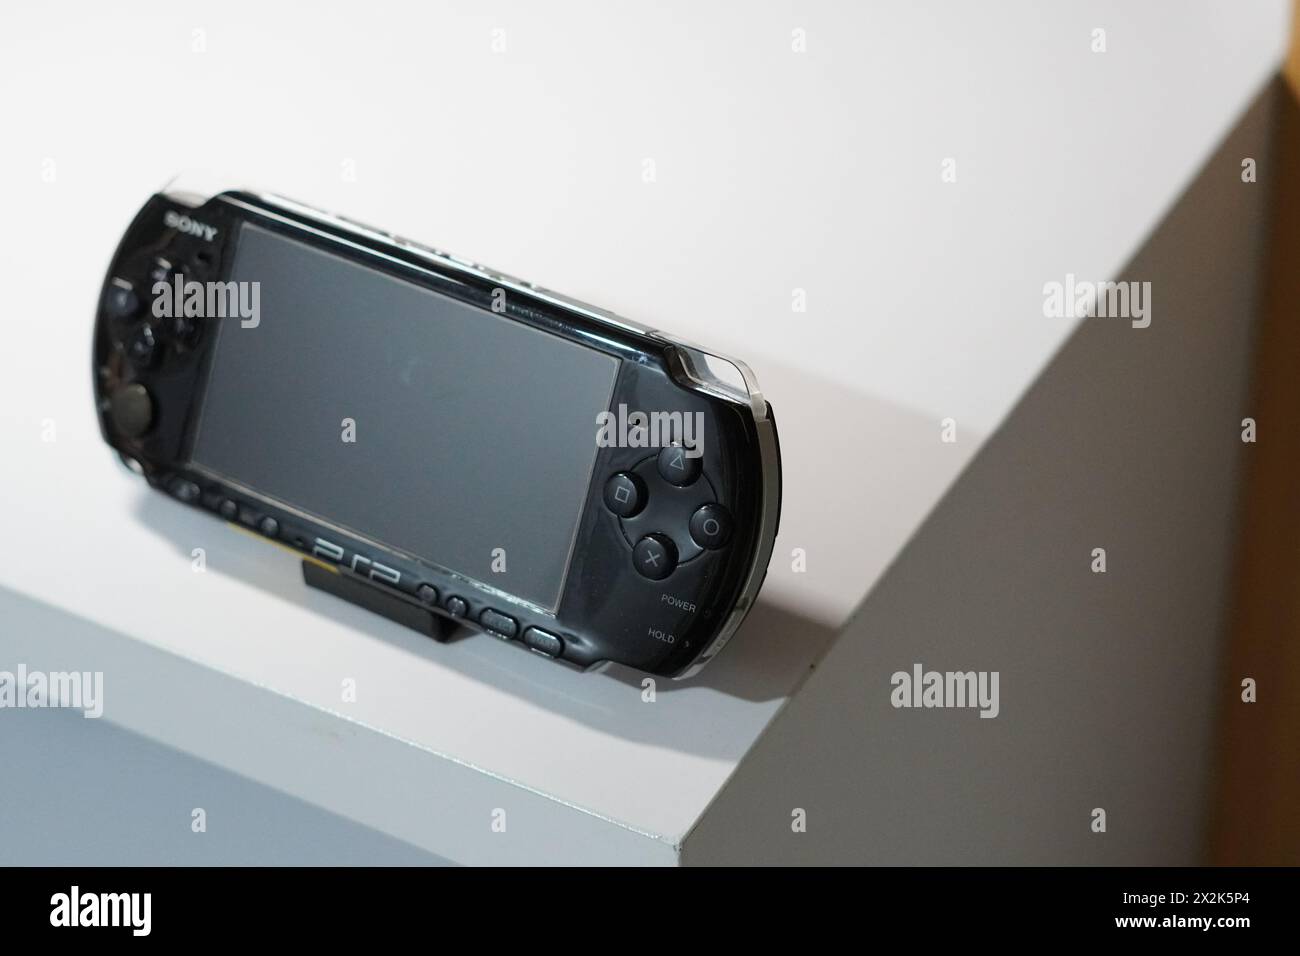 A black handheld game console from Sony called PSP on a white table Stock Photo